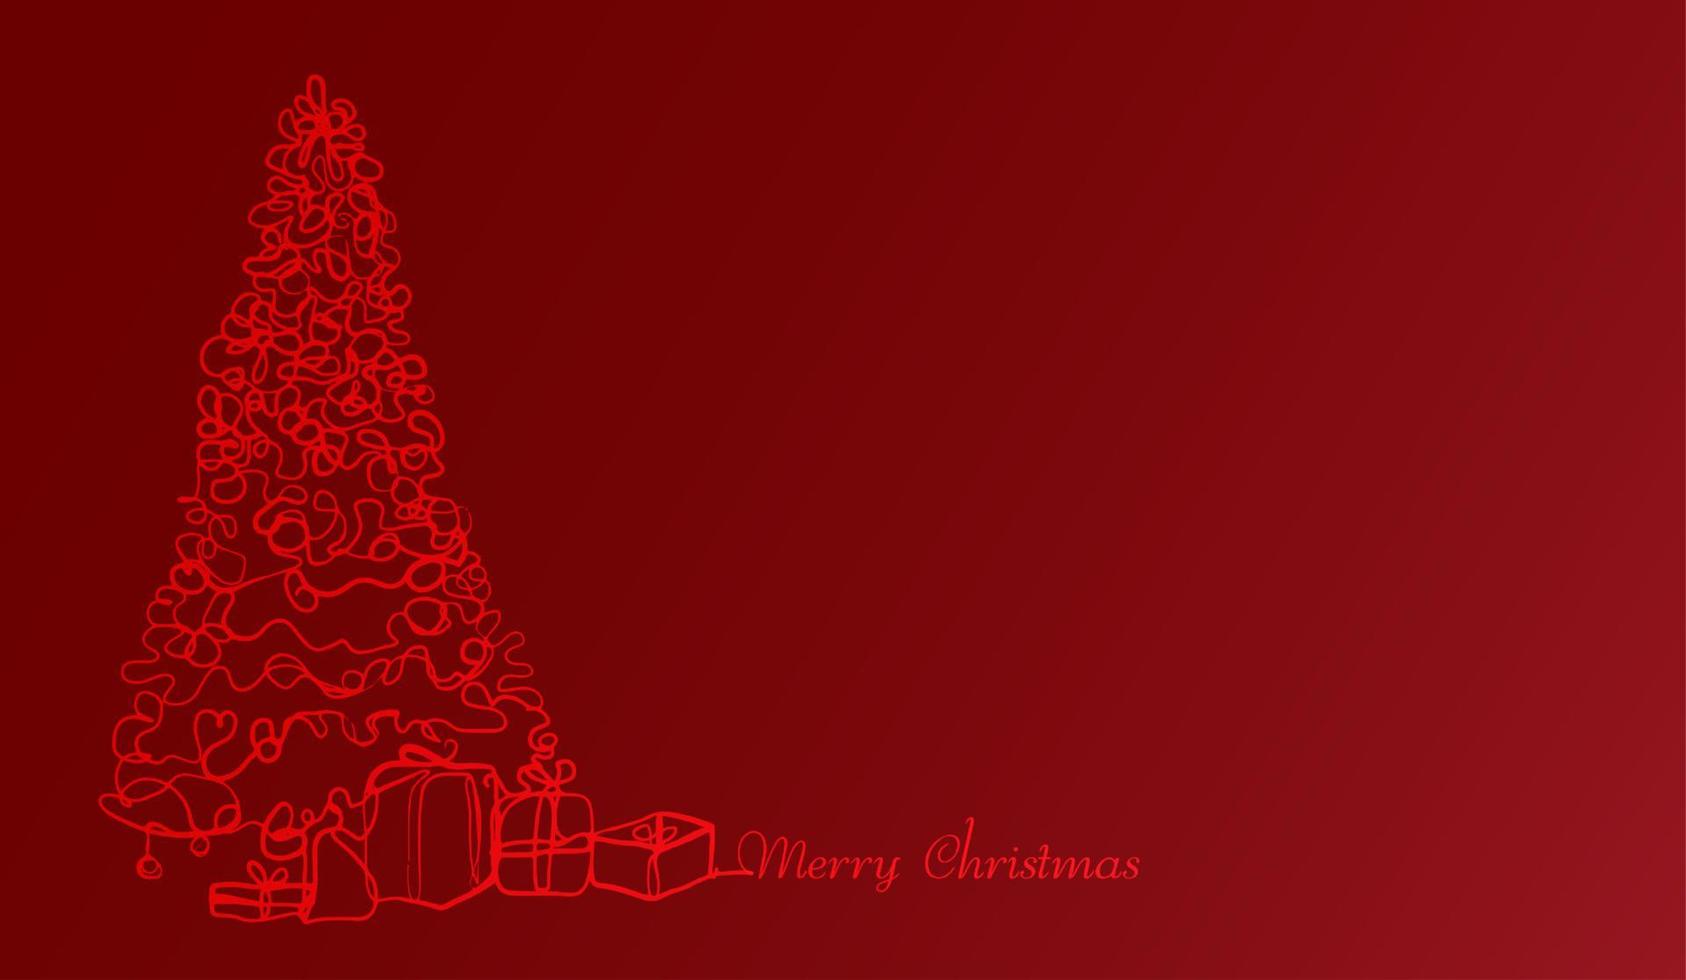 Christmas tree and presents or gift box. continuous line merry christmas drawing on red background. vector design